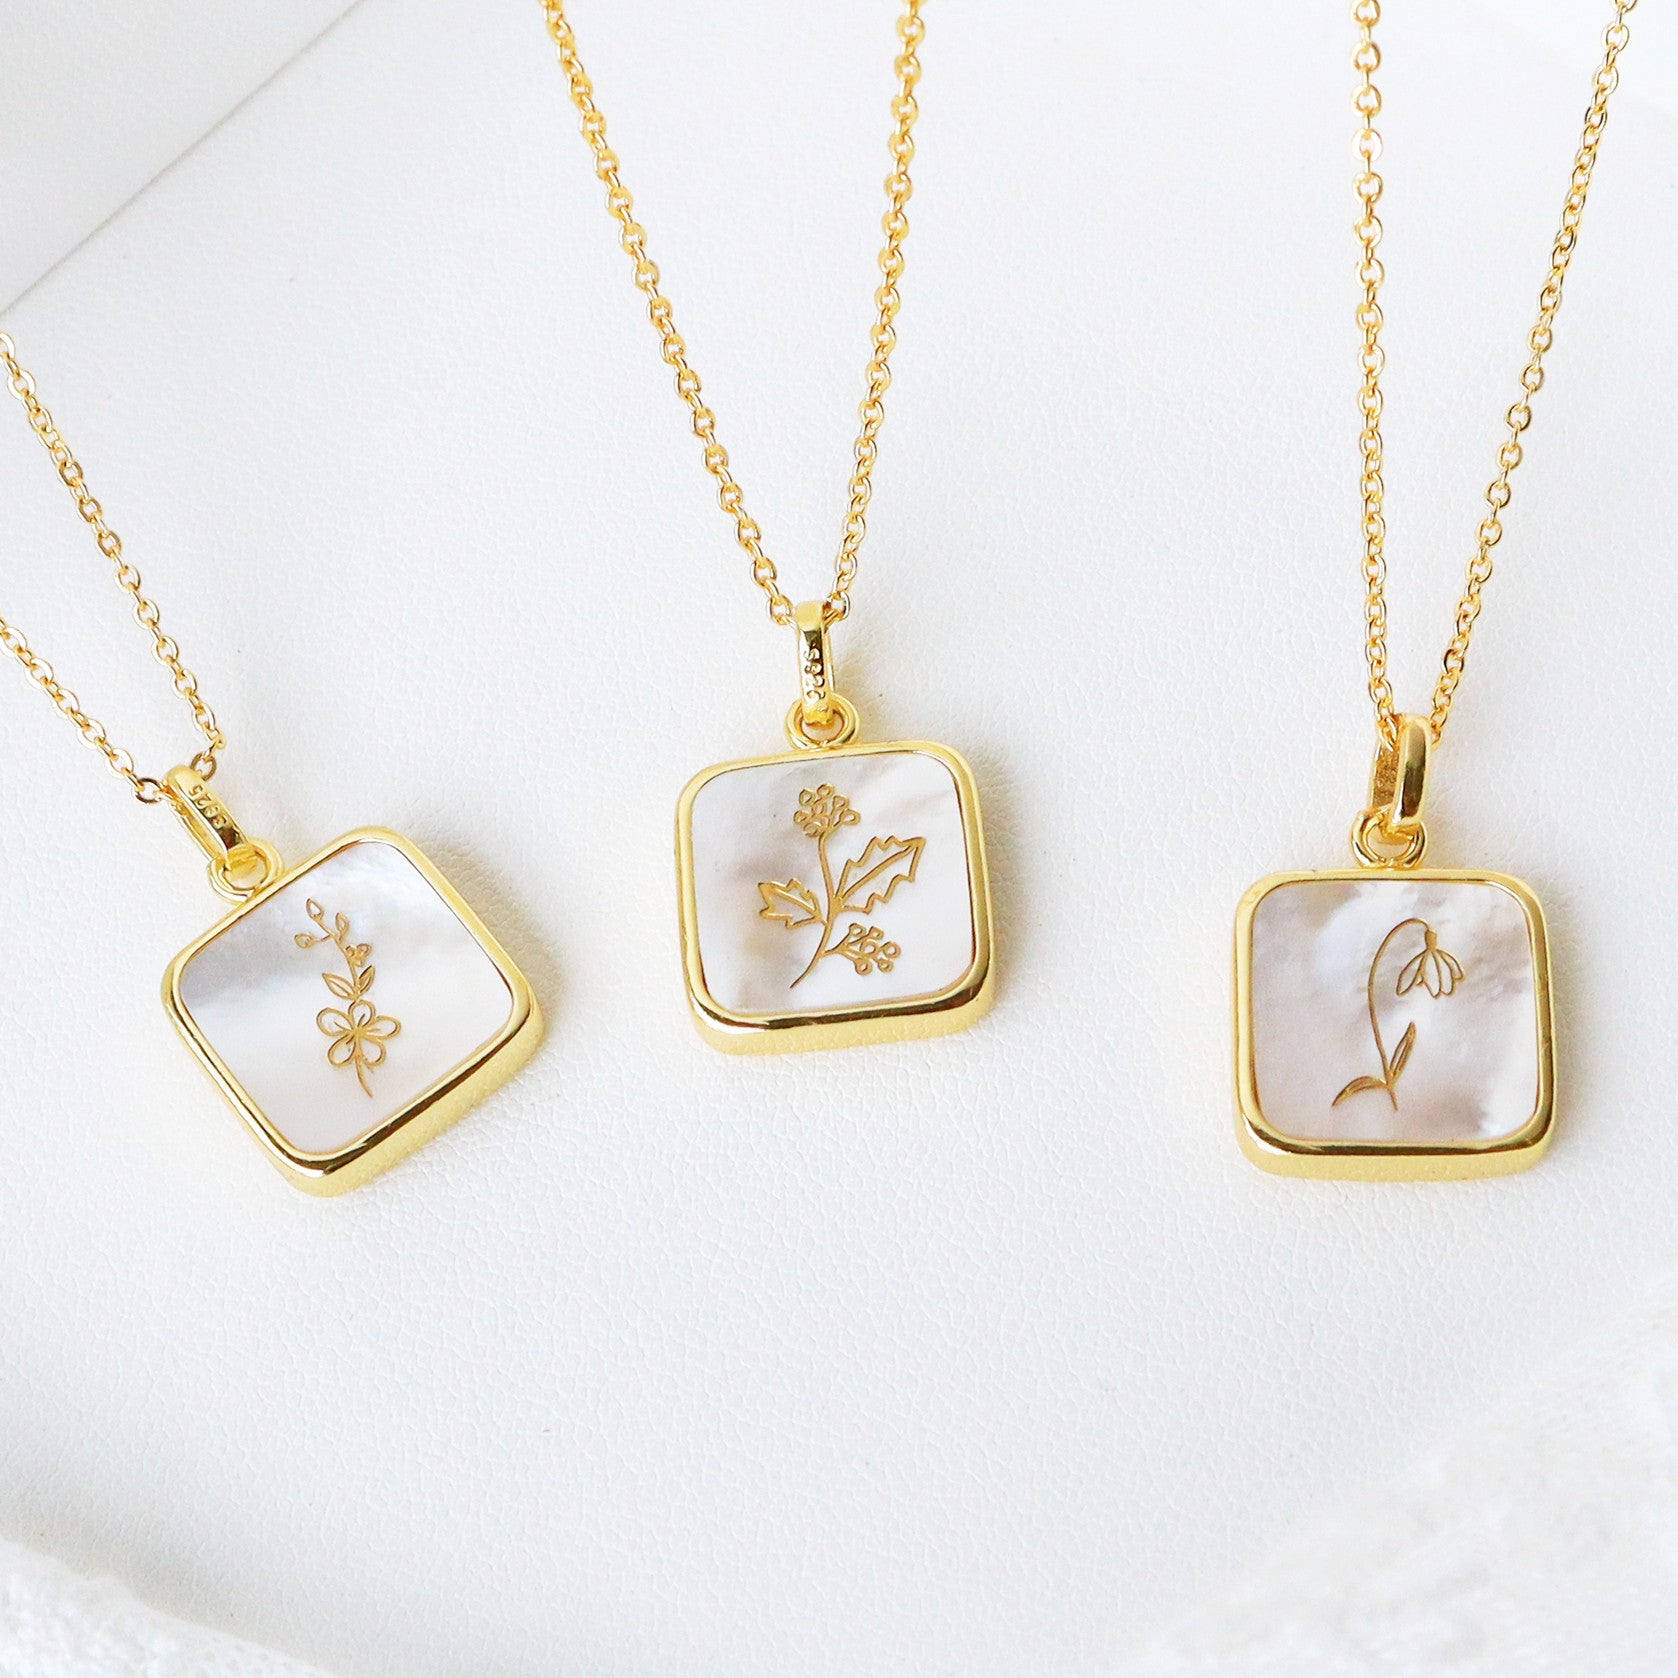 Gold Square White Shell Birth Month Flower Pendant Necklace, Personalization Jewelry KZ040